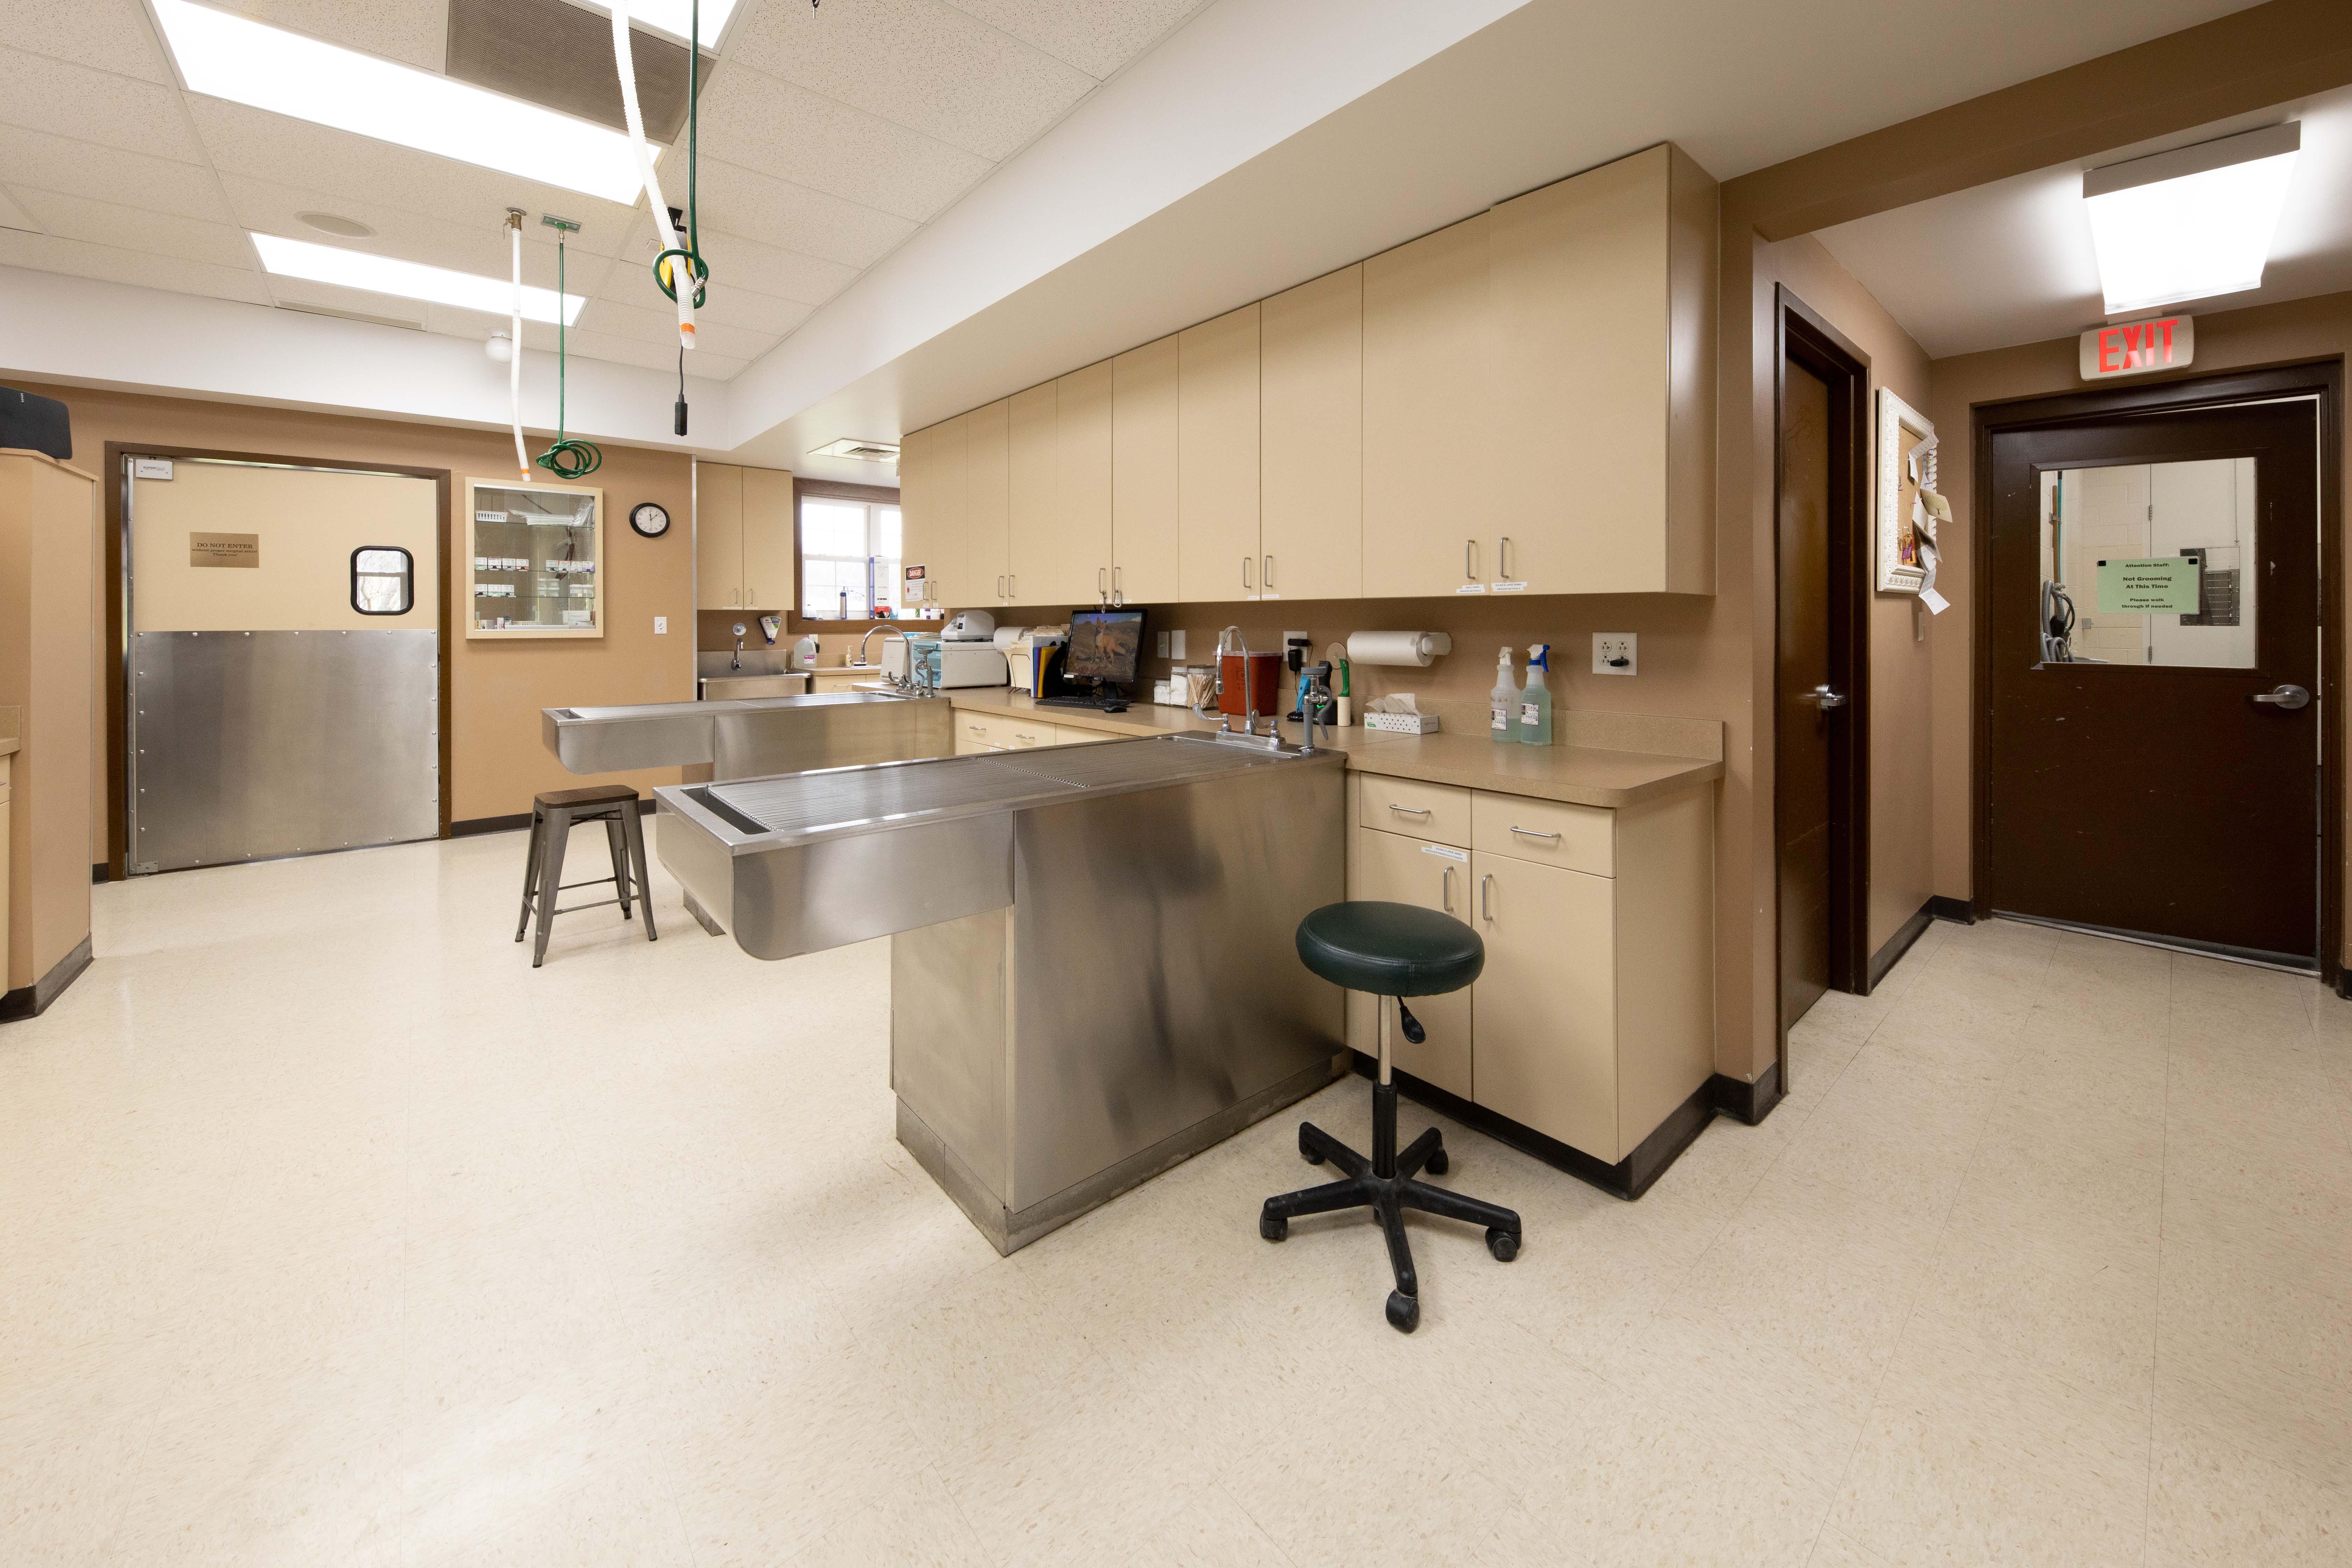 Our facility houses multiple exam rooms, a treatment area, an in-house laboratory, a surgical suite, and digital radiography and ultrasound technology.